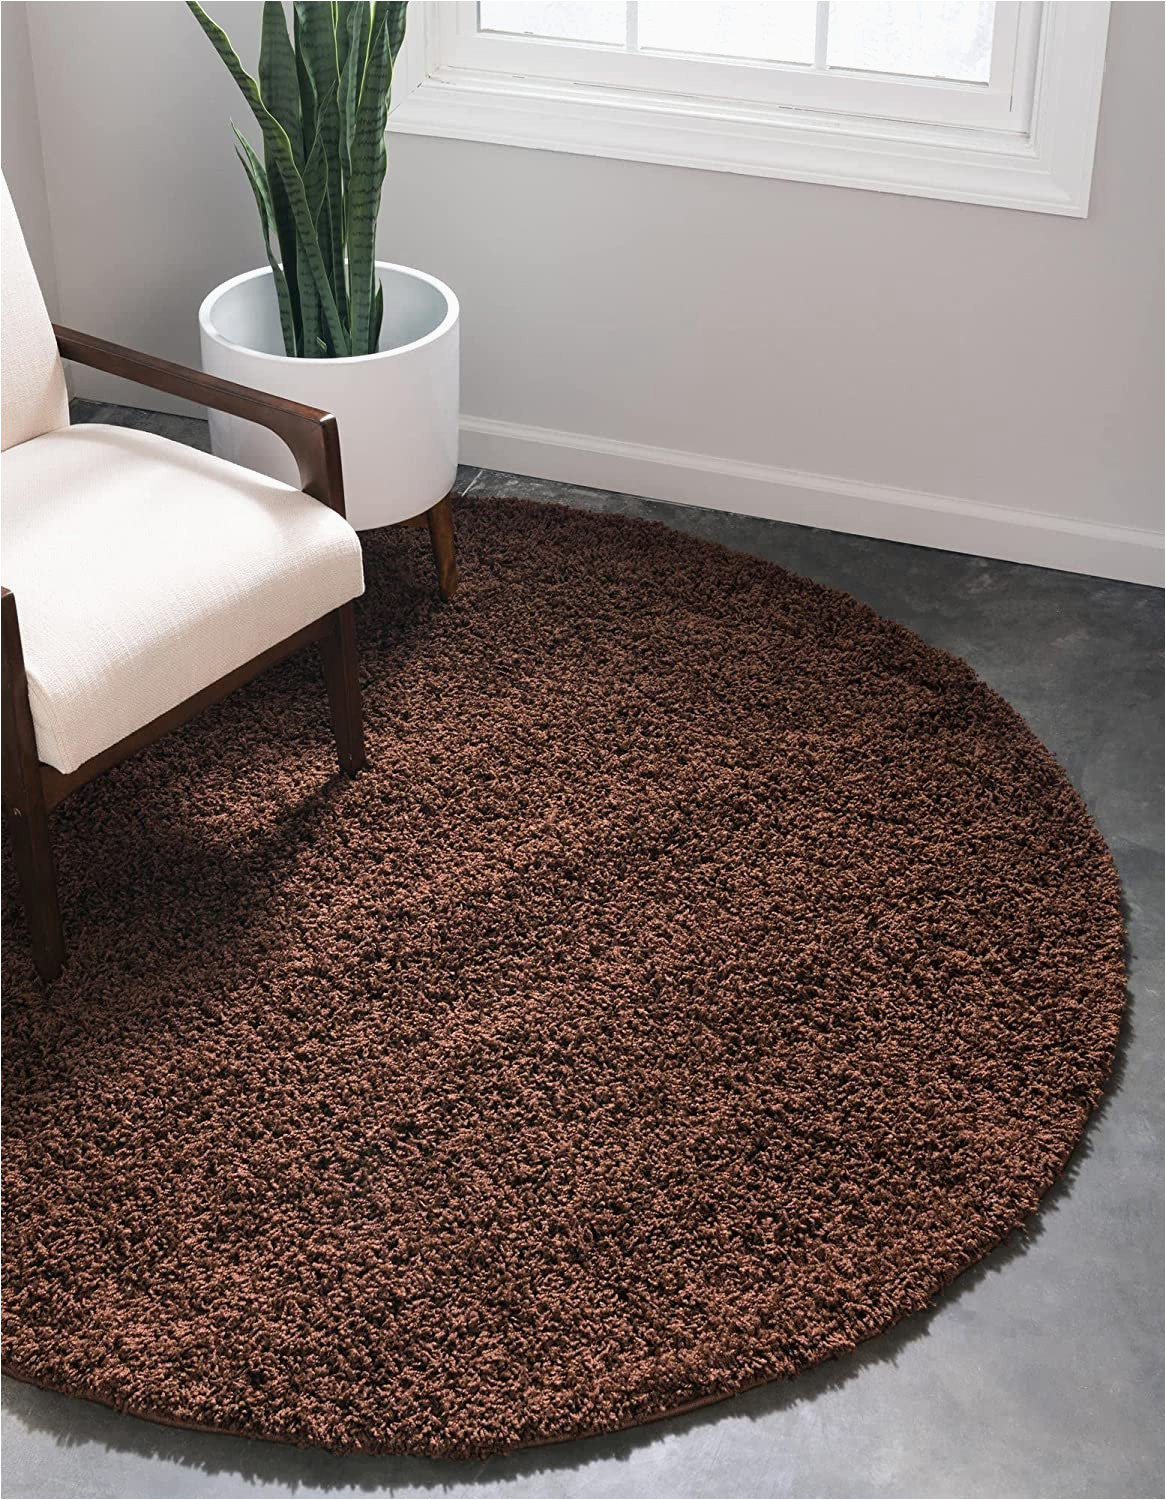 Solid Chocolate Brown area Rug Unique Loom solo solid Shag Collection Modern area Rug_shg001, 5 …